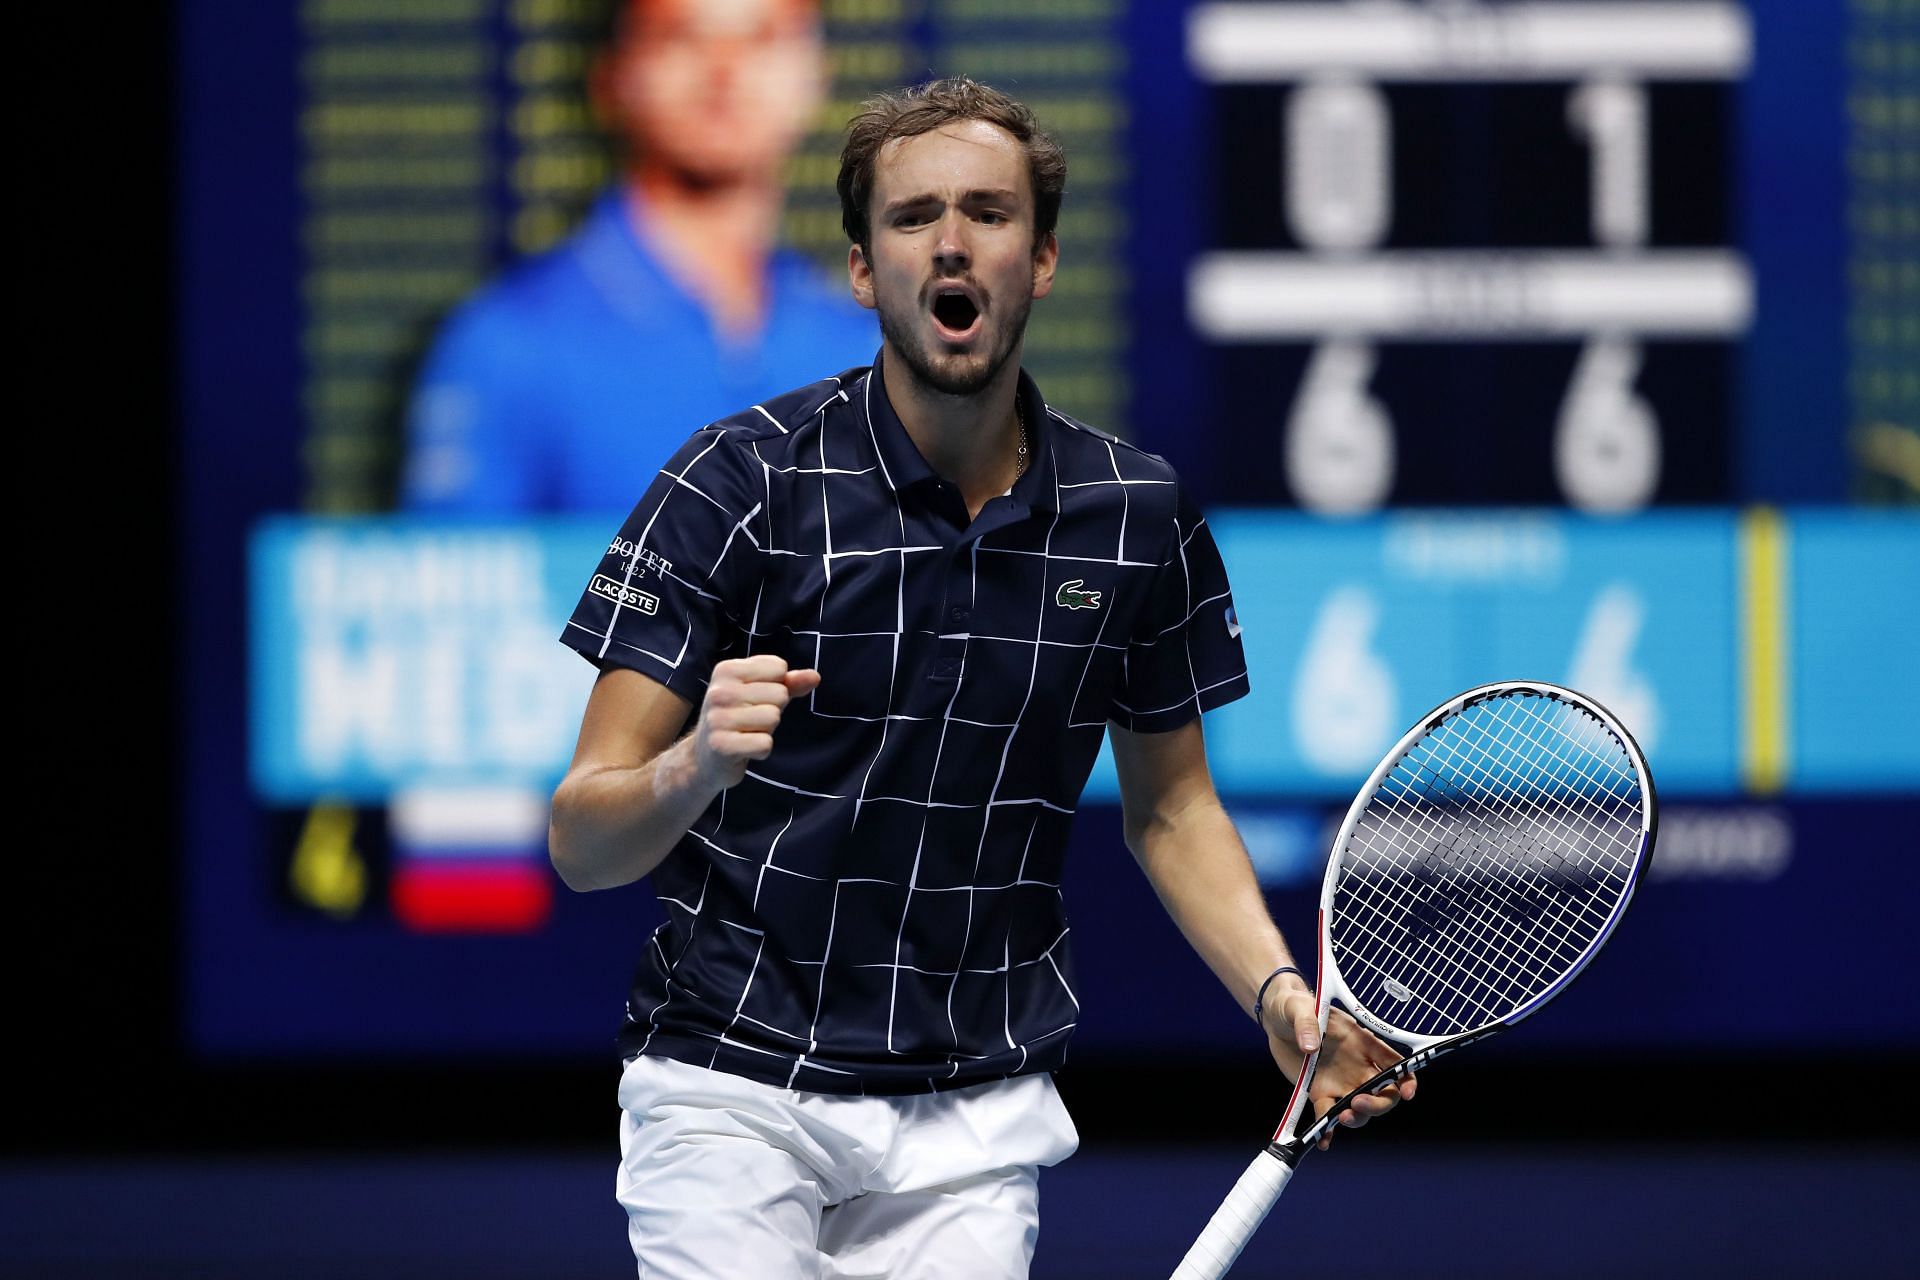 Daniil Medvedev will begin his 2022 Canadian Open as the top seed and defending champion